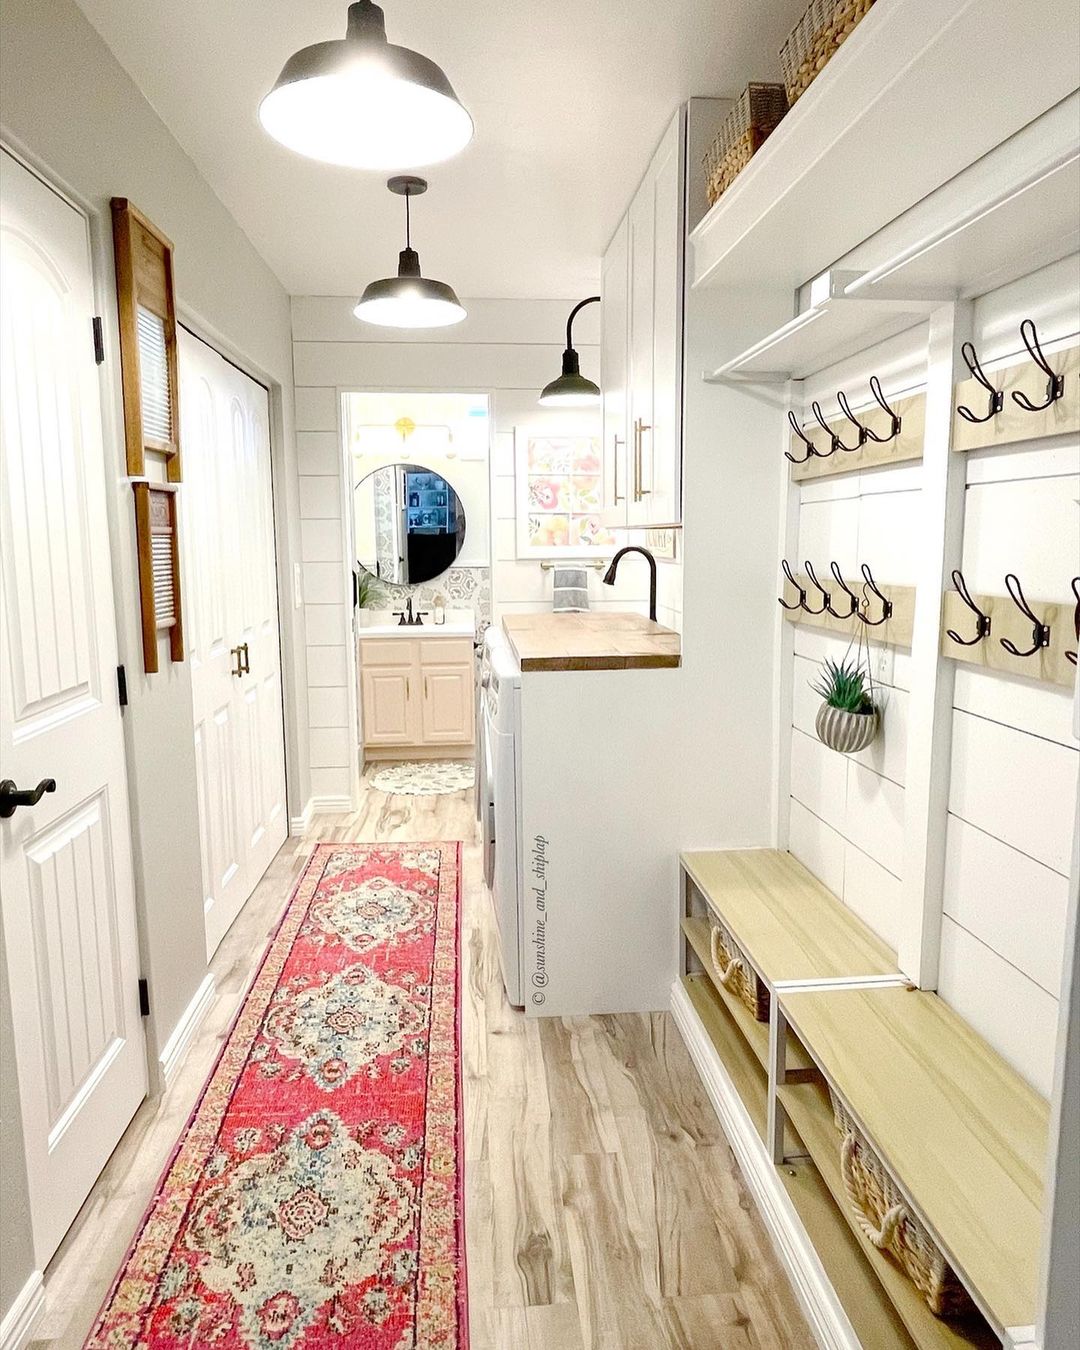 to maximize space in your long narrow laundry room, make use of vertical wall space by installing hooks for hanging items such as bags, decorative items, and of course, clothes.